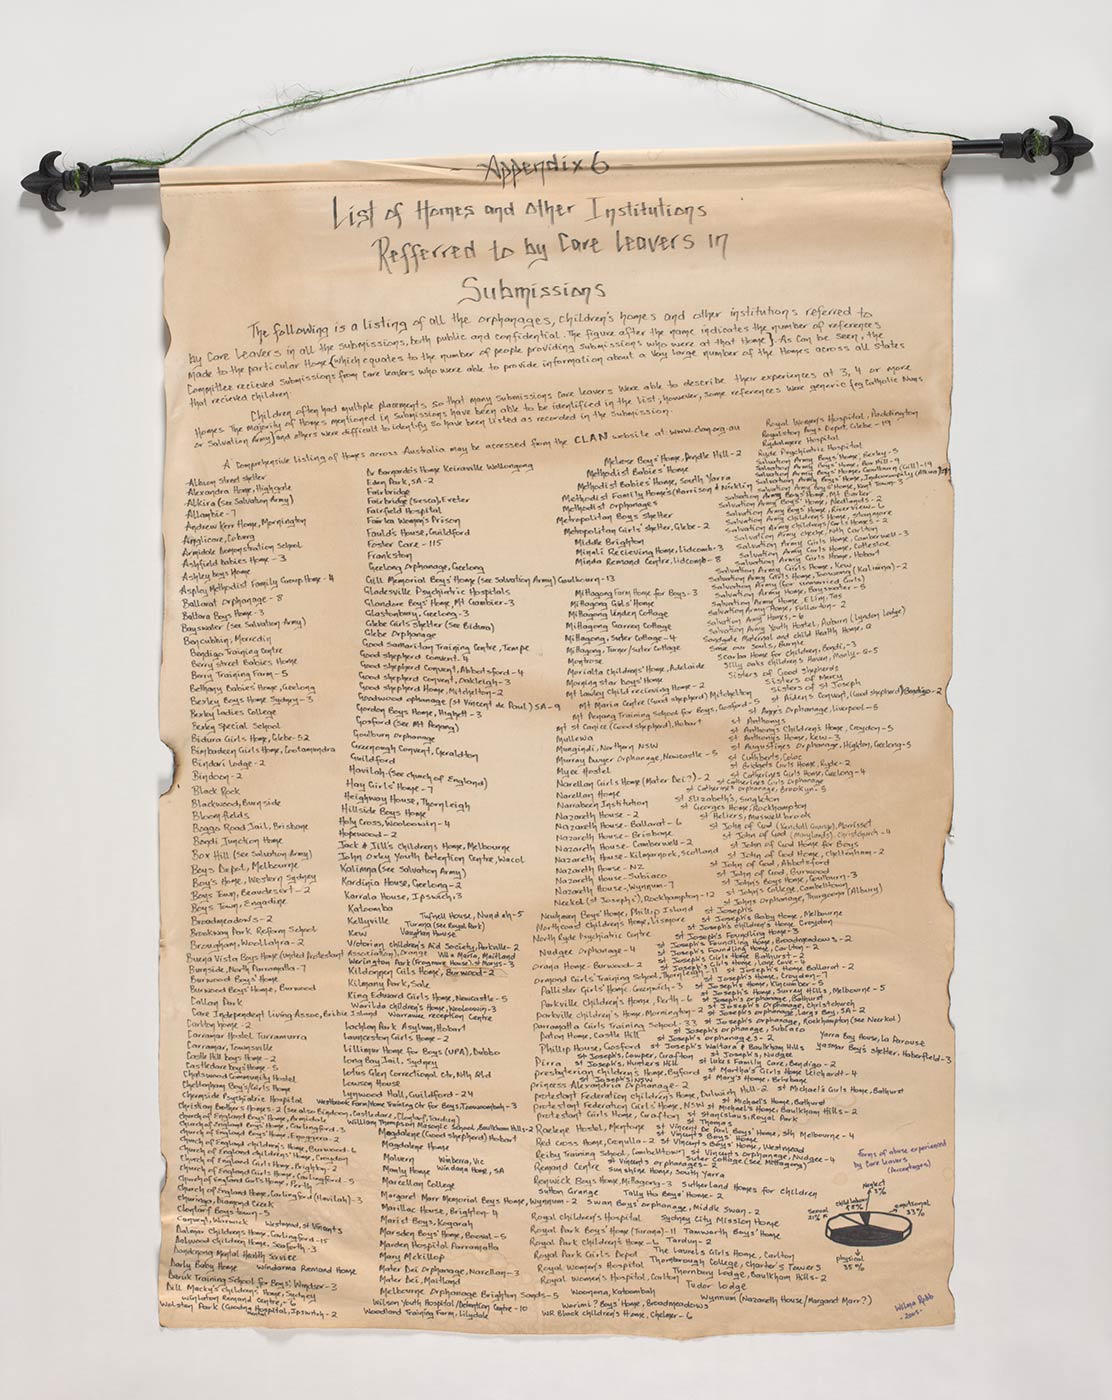 Cream fabric banner mounted on a black wooden pole with fleur de lys ends. The banner has burnt edges and has the words 'Appendix 6 / List of Homes & other Institutions / Referred to by Care Leavers in Submissions' written across the top in black marker pen. Hundreds of homes and institutions are listed below in four columns. A pie chart bottom right  showing 'Forms of abuse experienced by Care Leavers' as percentages. - click to view larger image